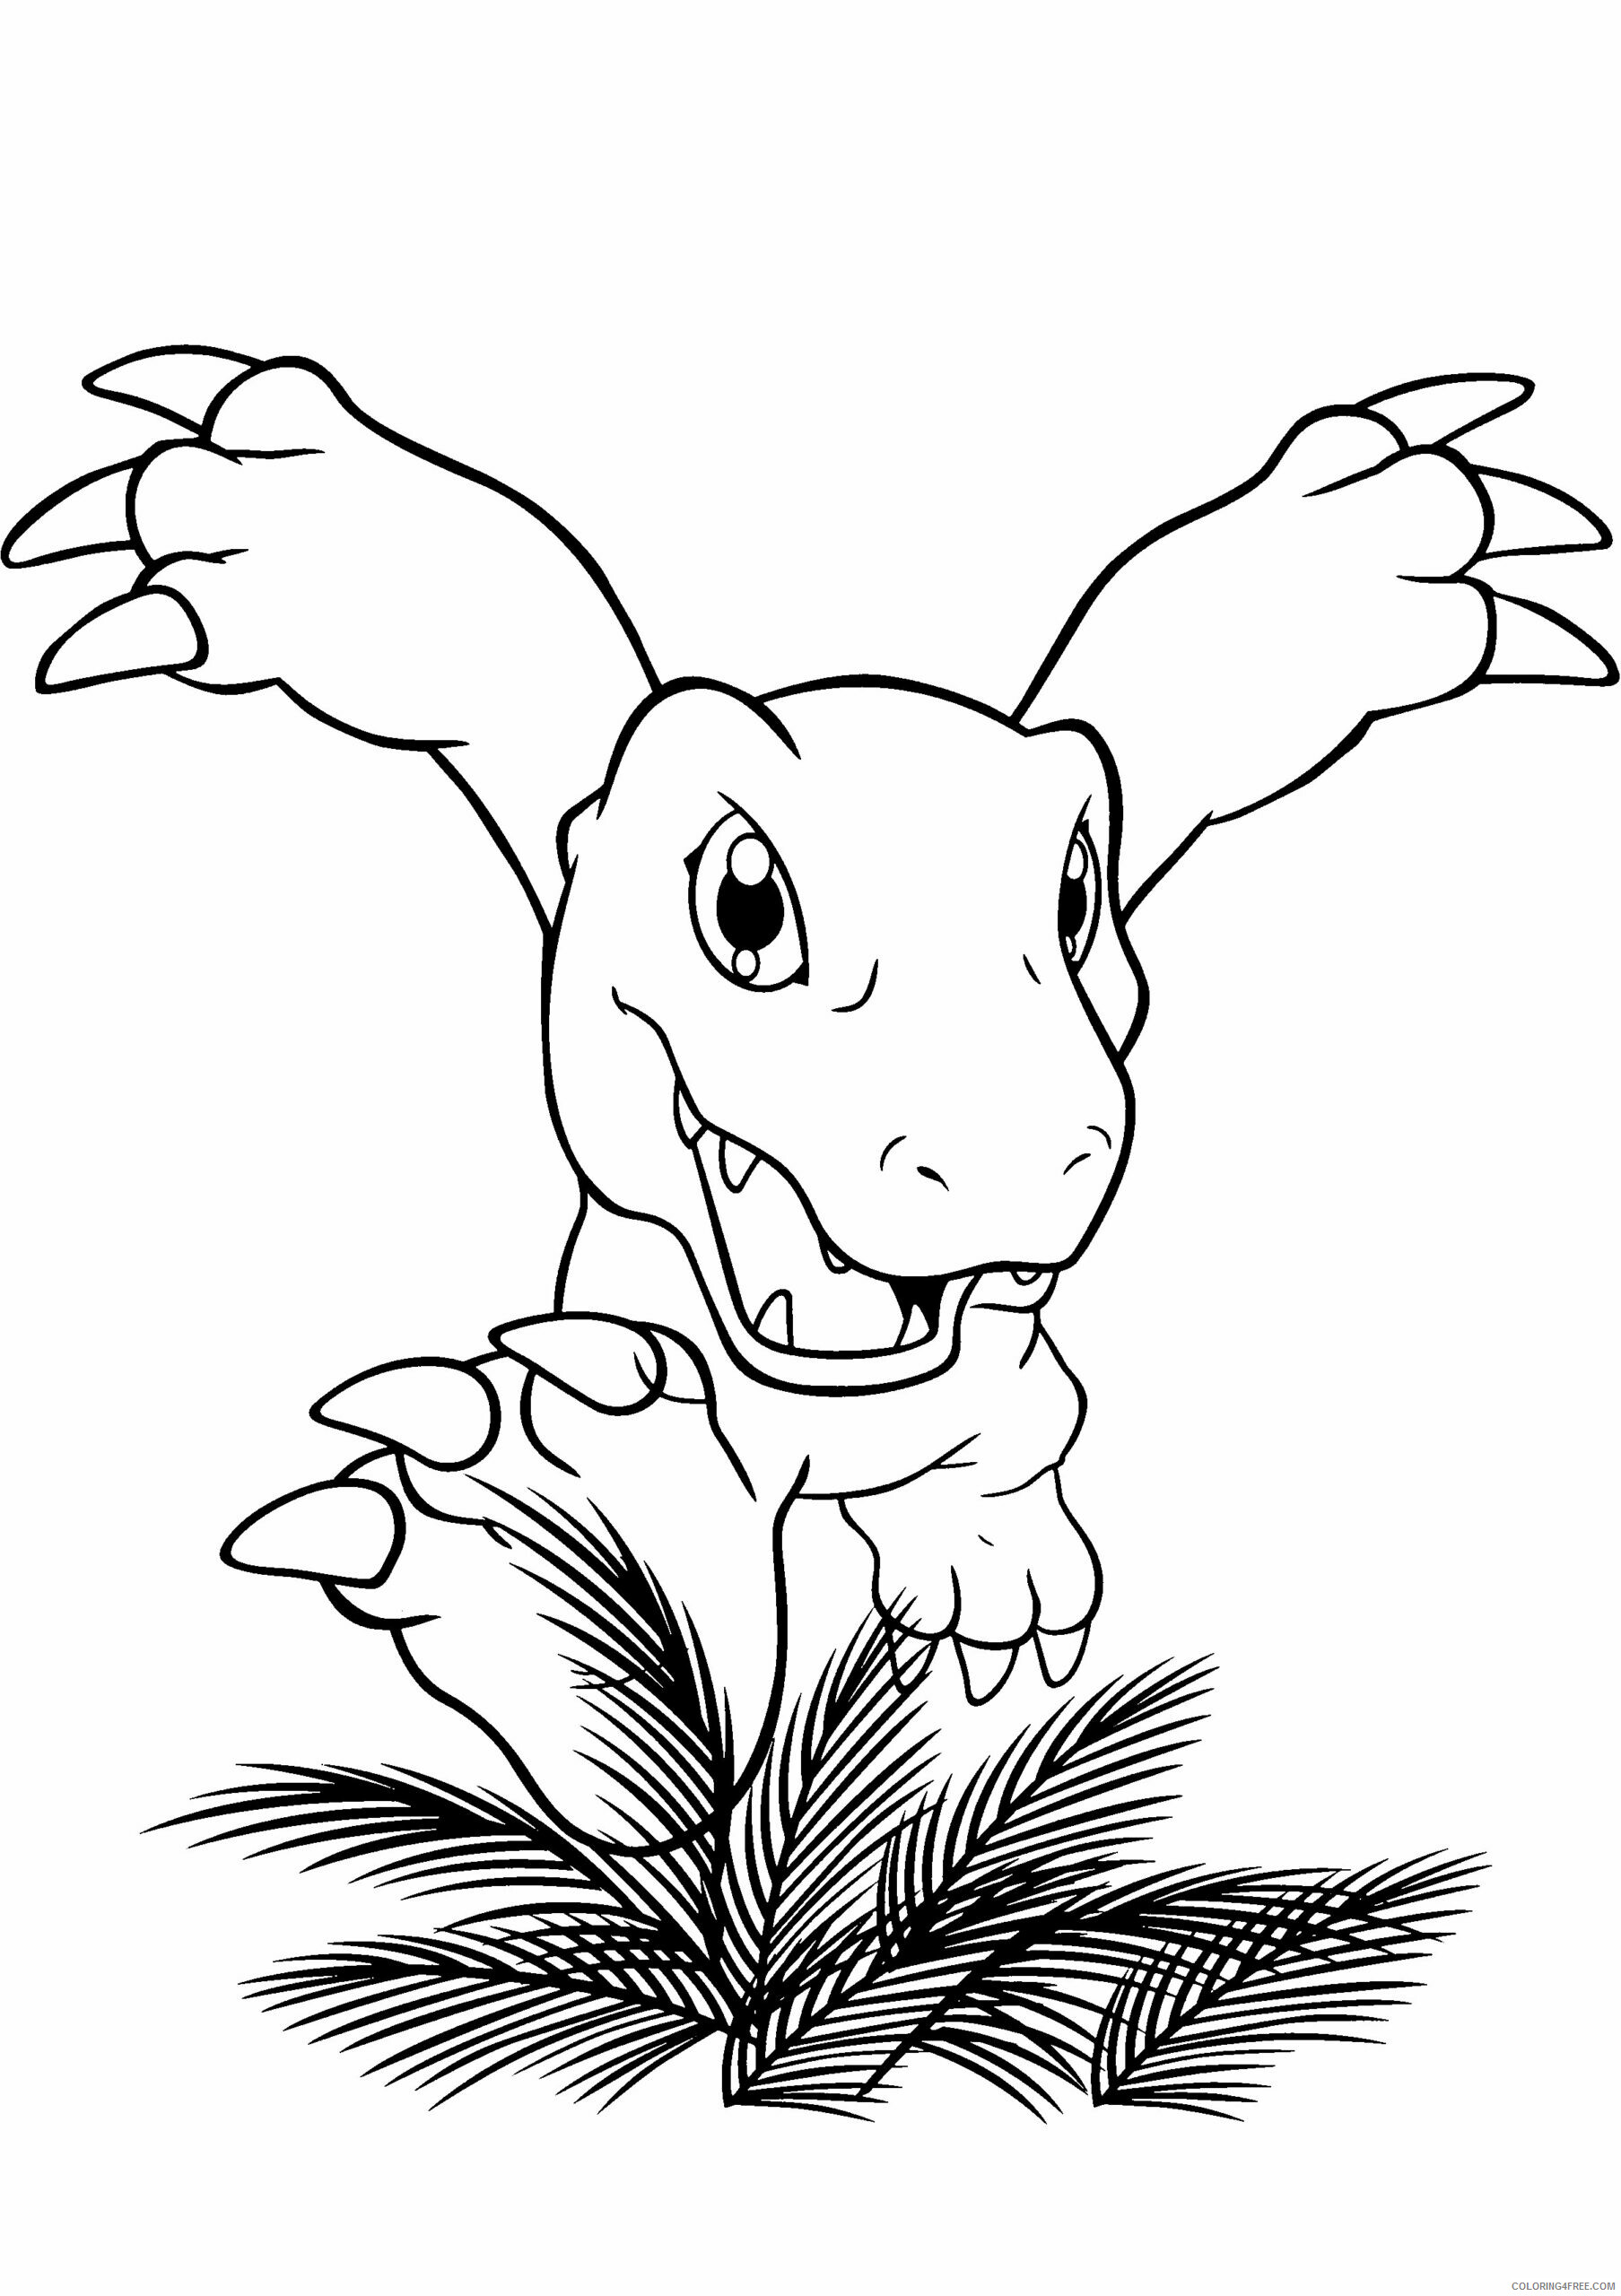 Digimon Printable Coloring Pages Anime digimon 107 2021 0214 Coloring4free